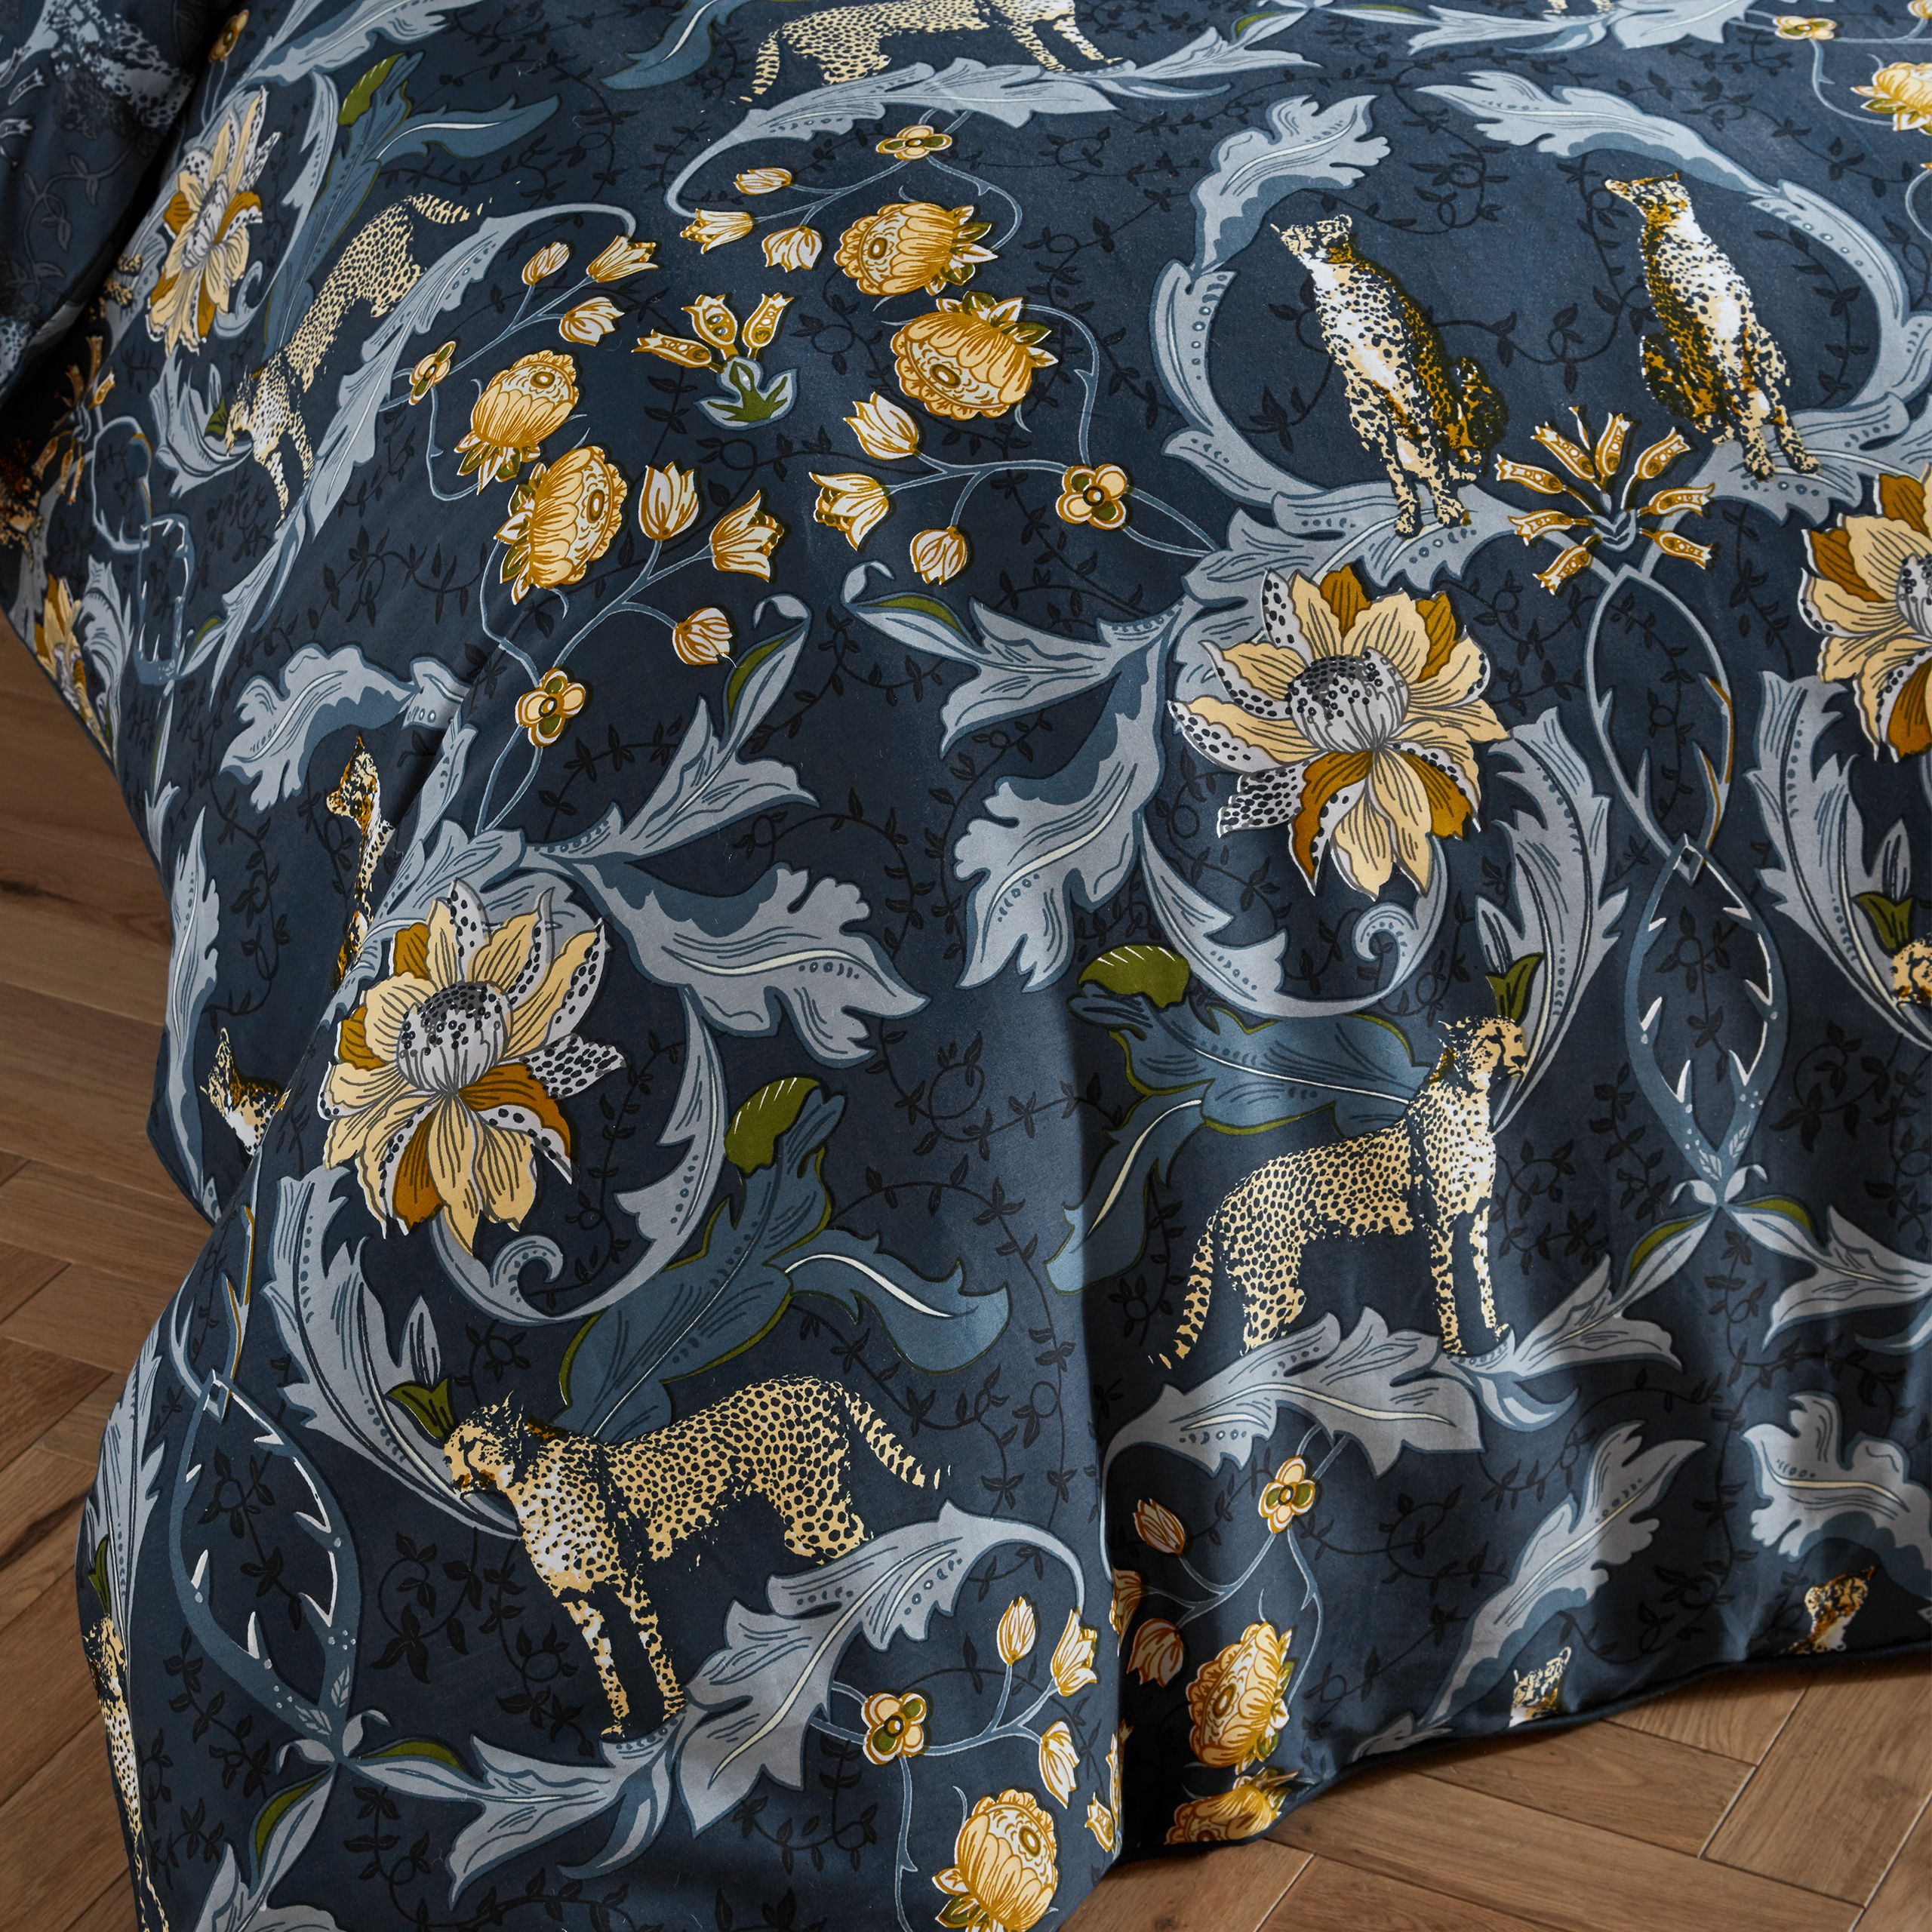 Inspired by Art Nouveau botanical illustrations, Nouvilla is a highly decorative design featuring charming cheetahs amongst meandering curves of plants and flowers. This luxury cotton sateen bedding features contrast piping, oxford edge pillowcases and a tonal coordinating print on the duvet cover reverse. This duvet cover set has been produced to a meticulous standard, with a thread count of 200 threads per square inch, to ensure a soft, smooth and long-lasting fabric.